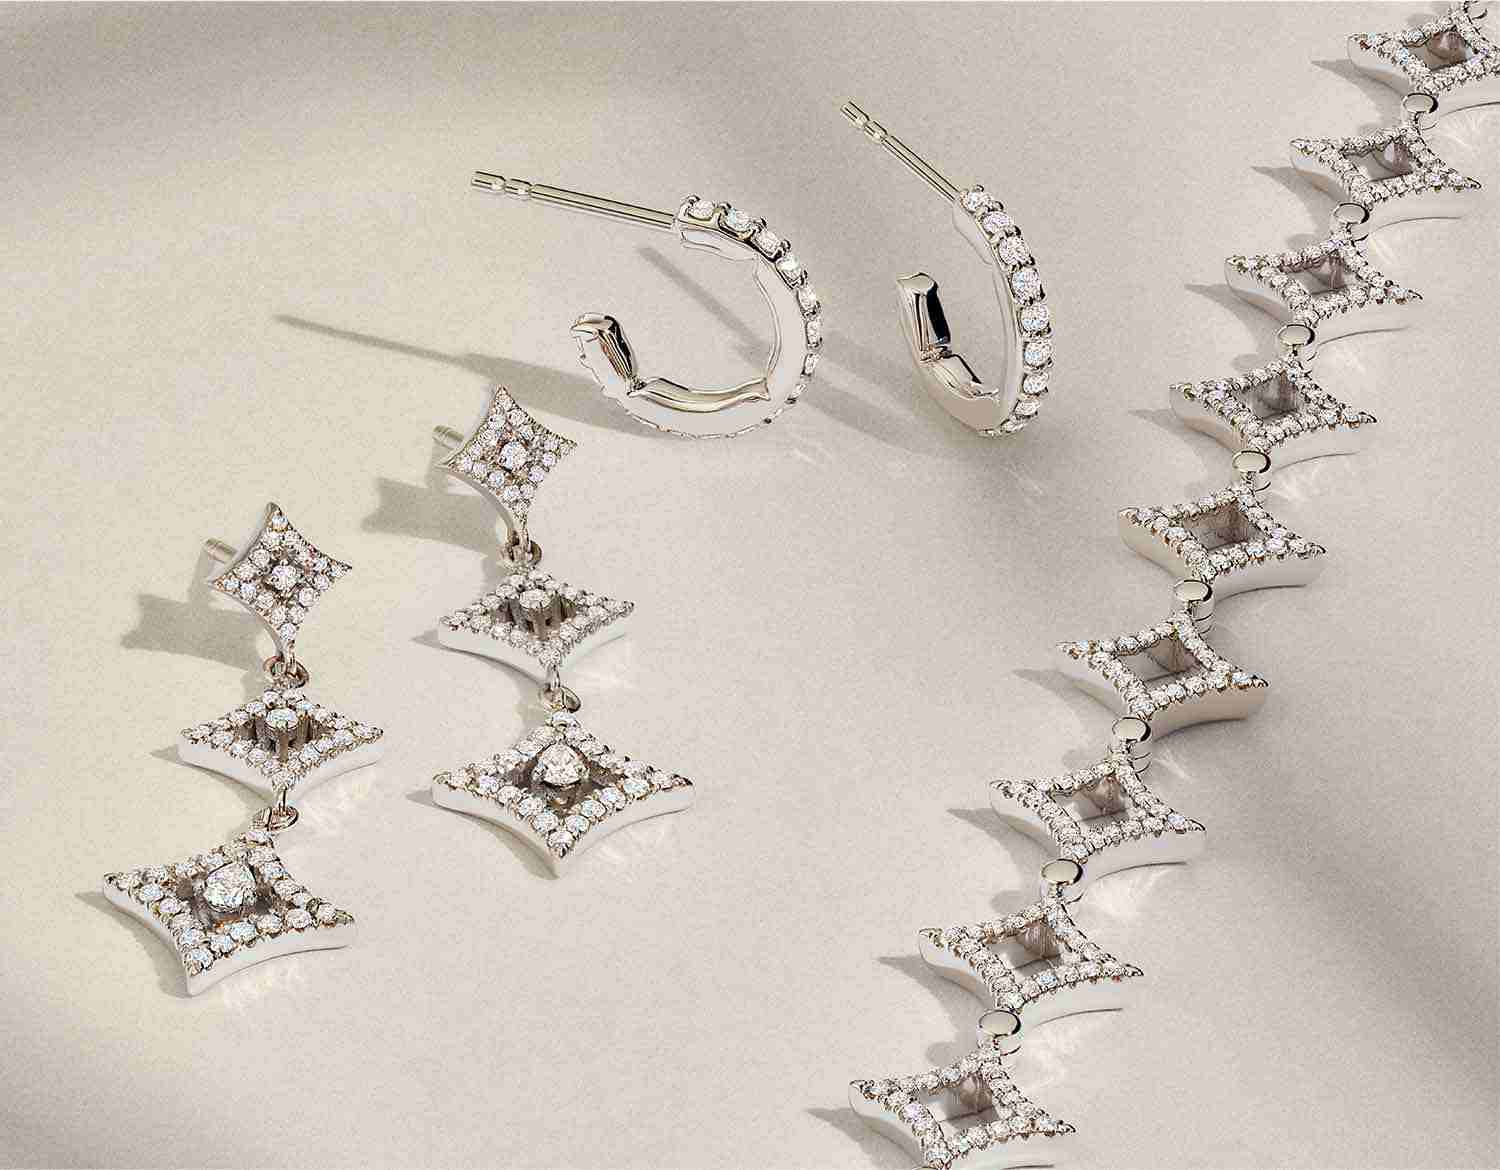 Lustrous diamond earrings and necklace